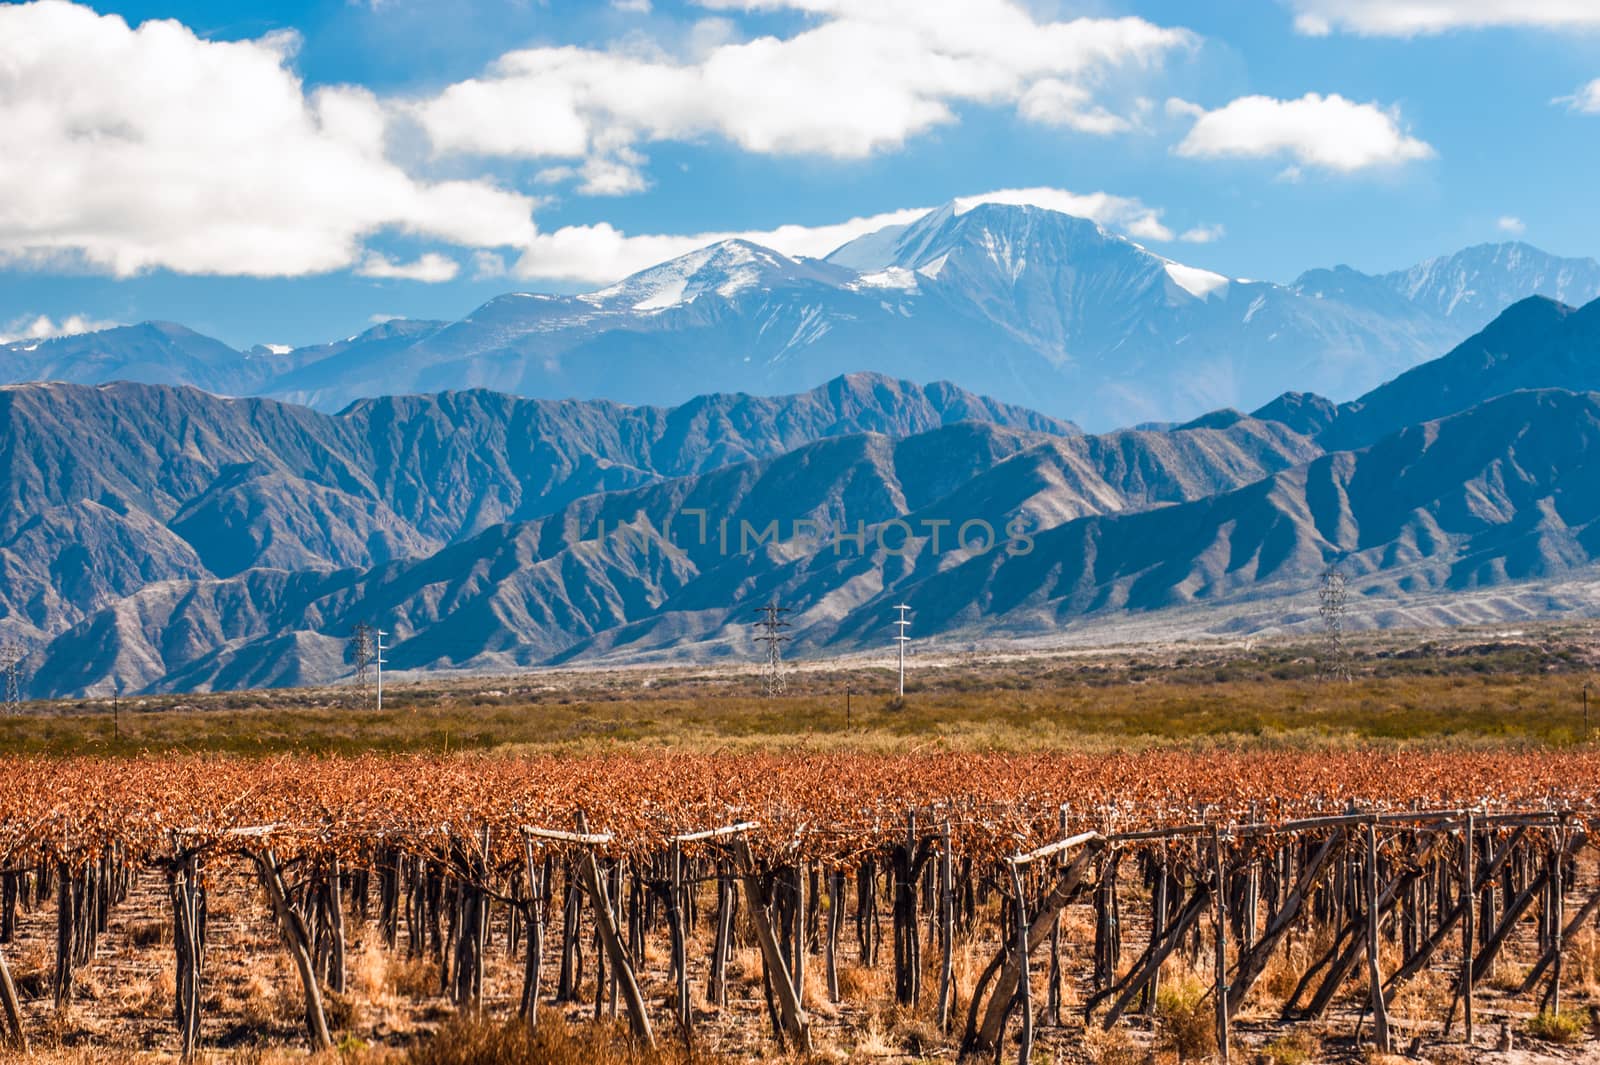 Volcano Aconcagua and Vineyard. Aconcagua is the highest mountain in the Americas at 6,962 m (22,841 ft). It is located in the Andes mountain range, in the Argentine province of Mendoza